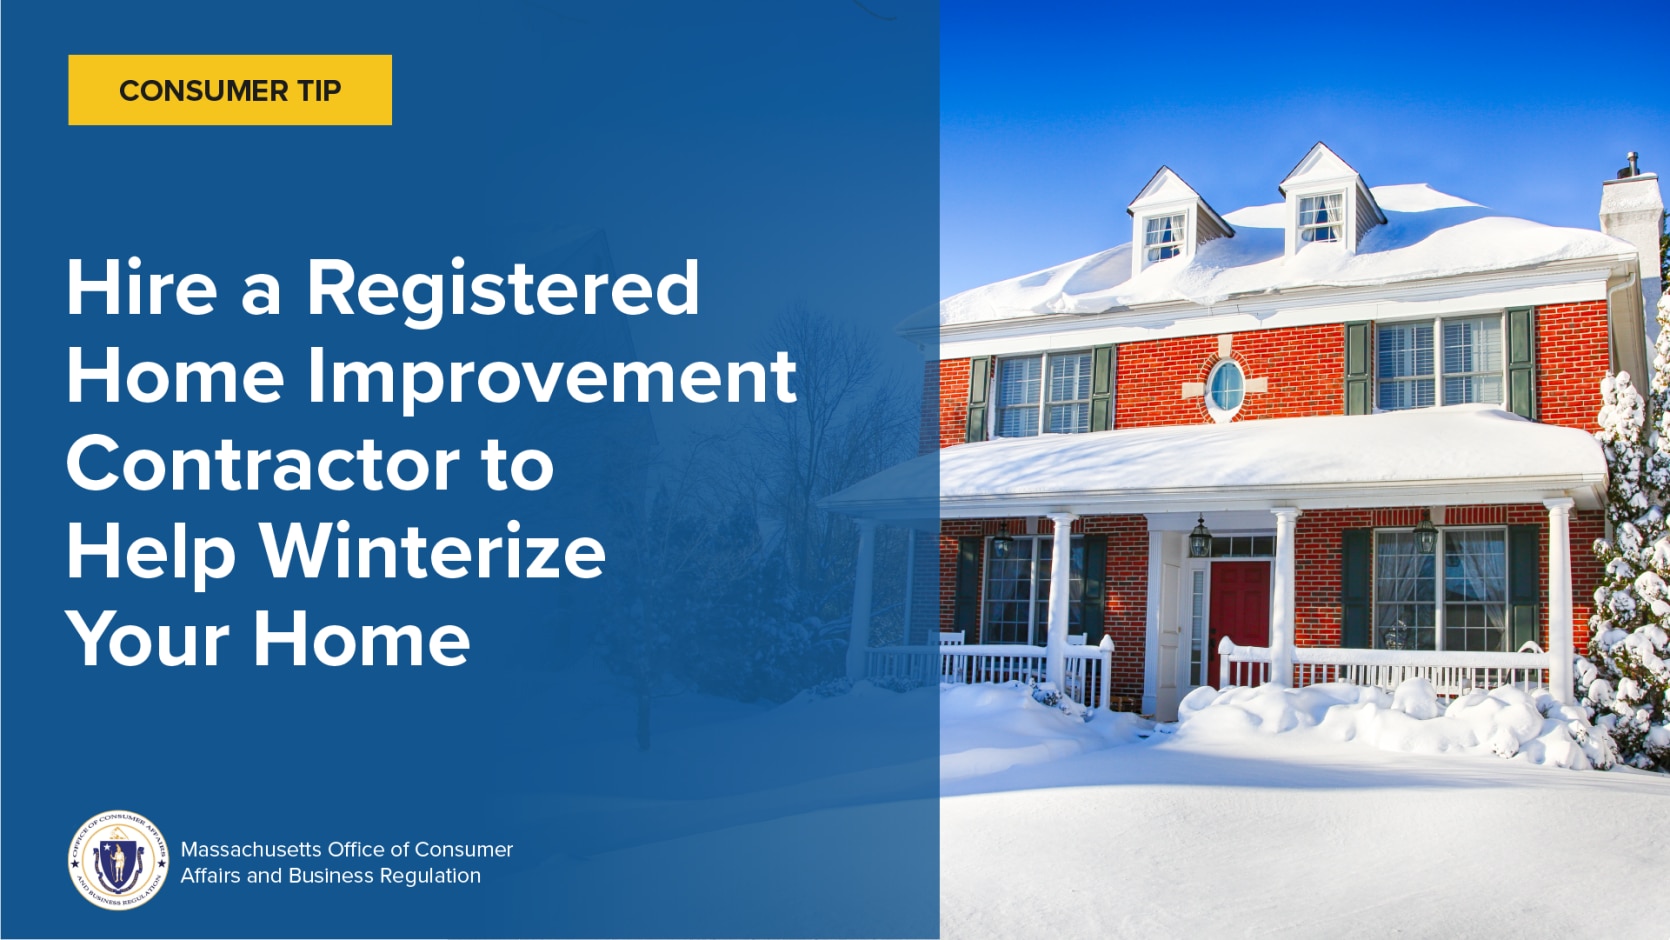 Consumer Tip: Hire Registered Home Improvement Contractors for Winterization Projects